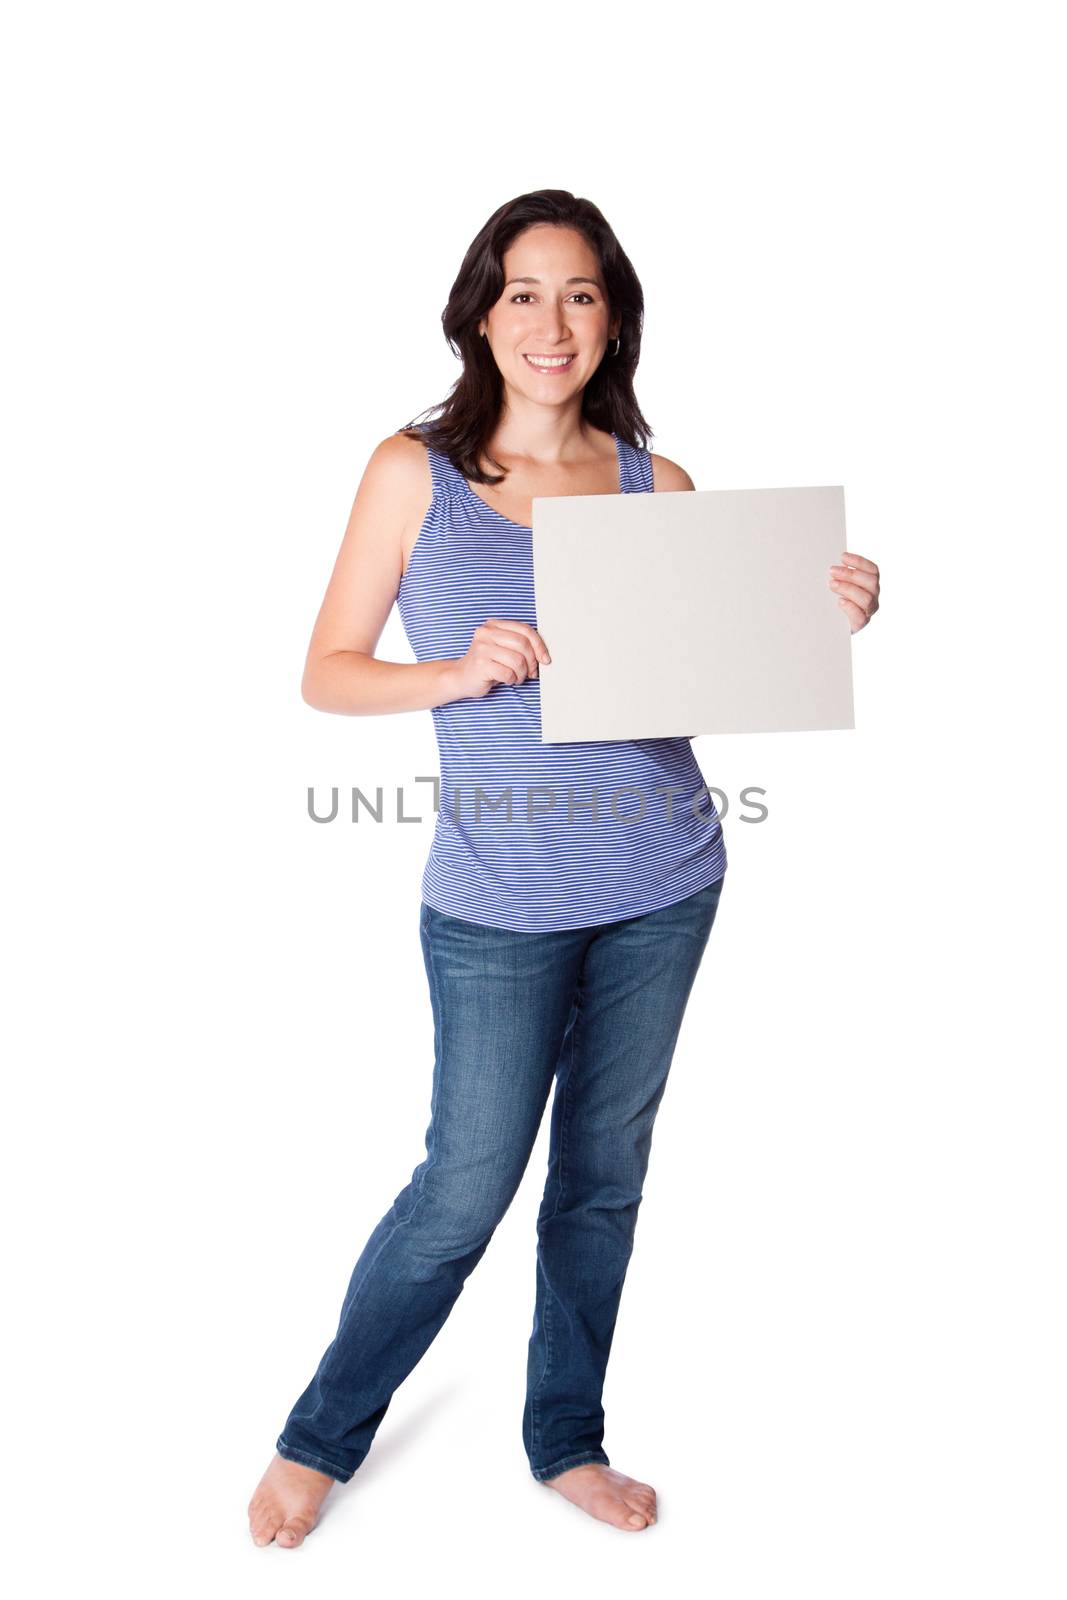 Happy smiling young woman standing holding whiteboard sign, isolated.